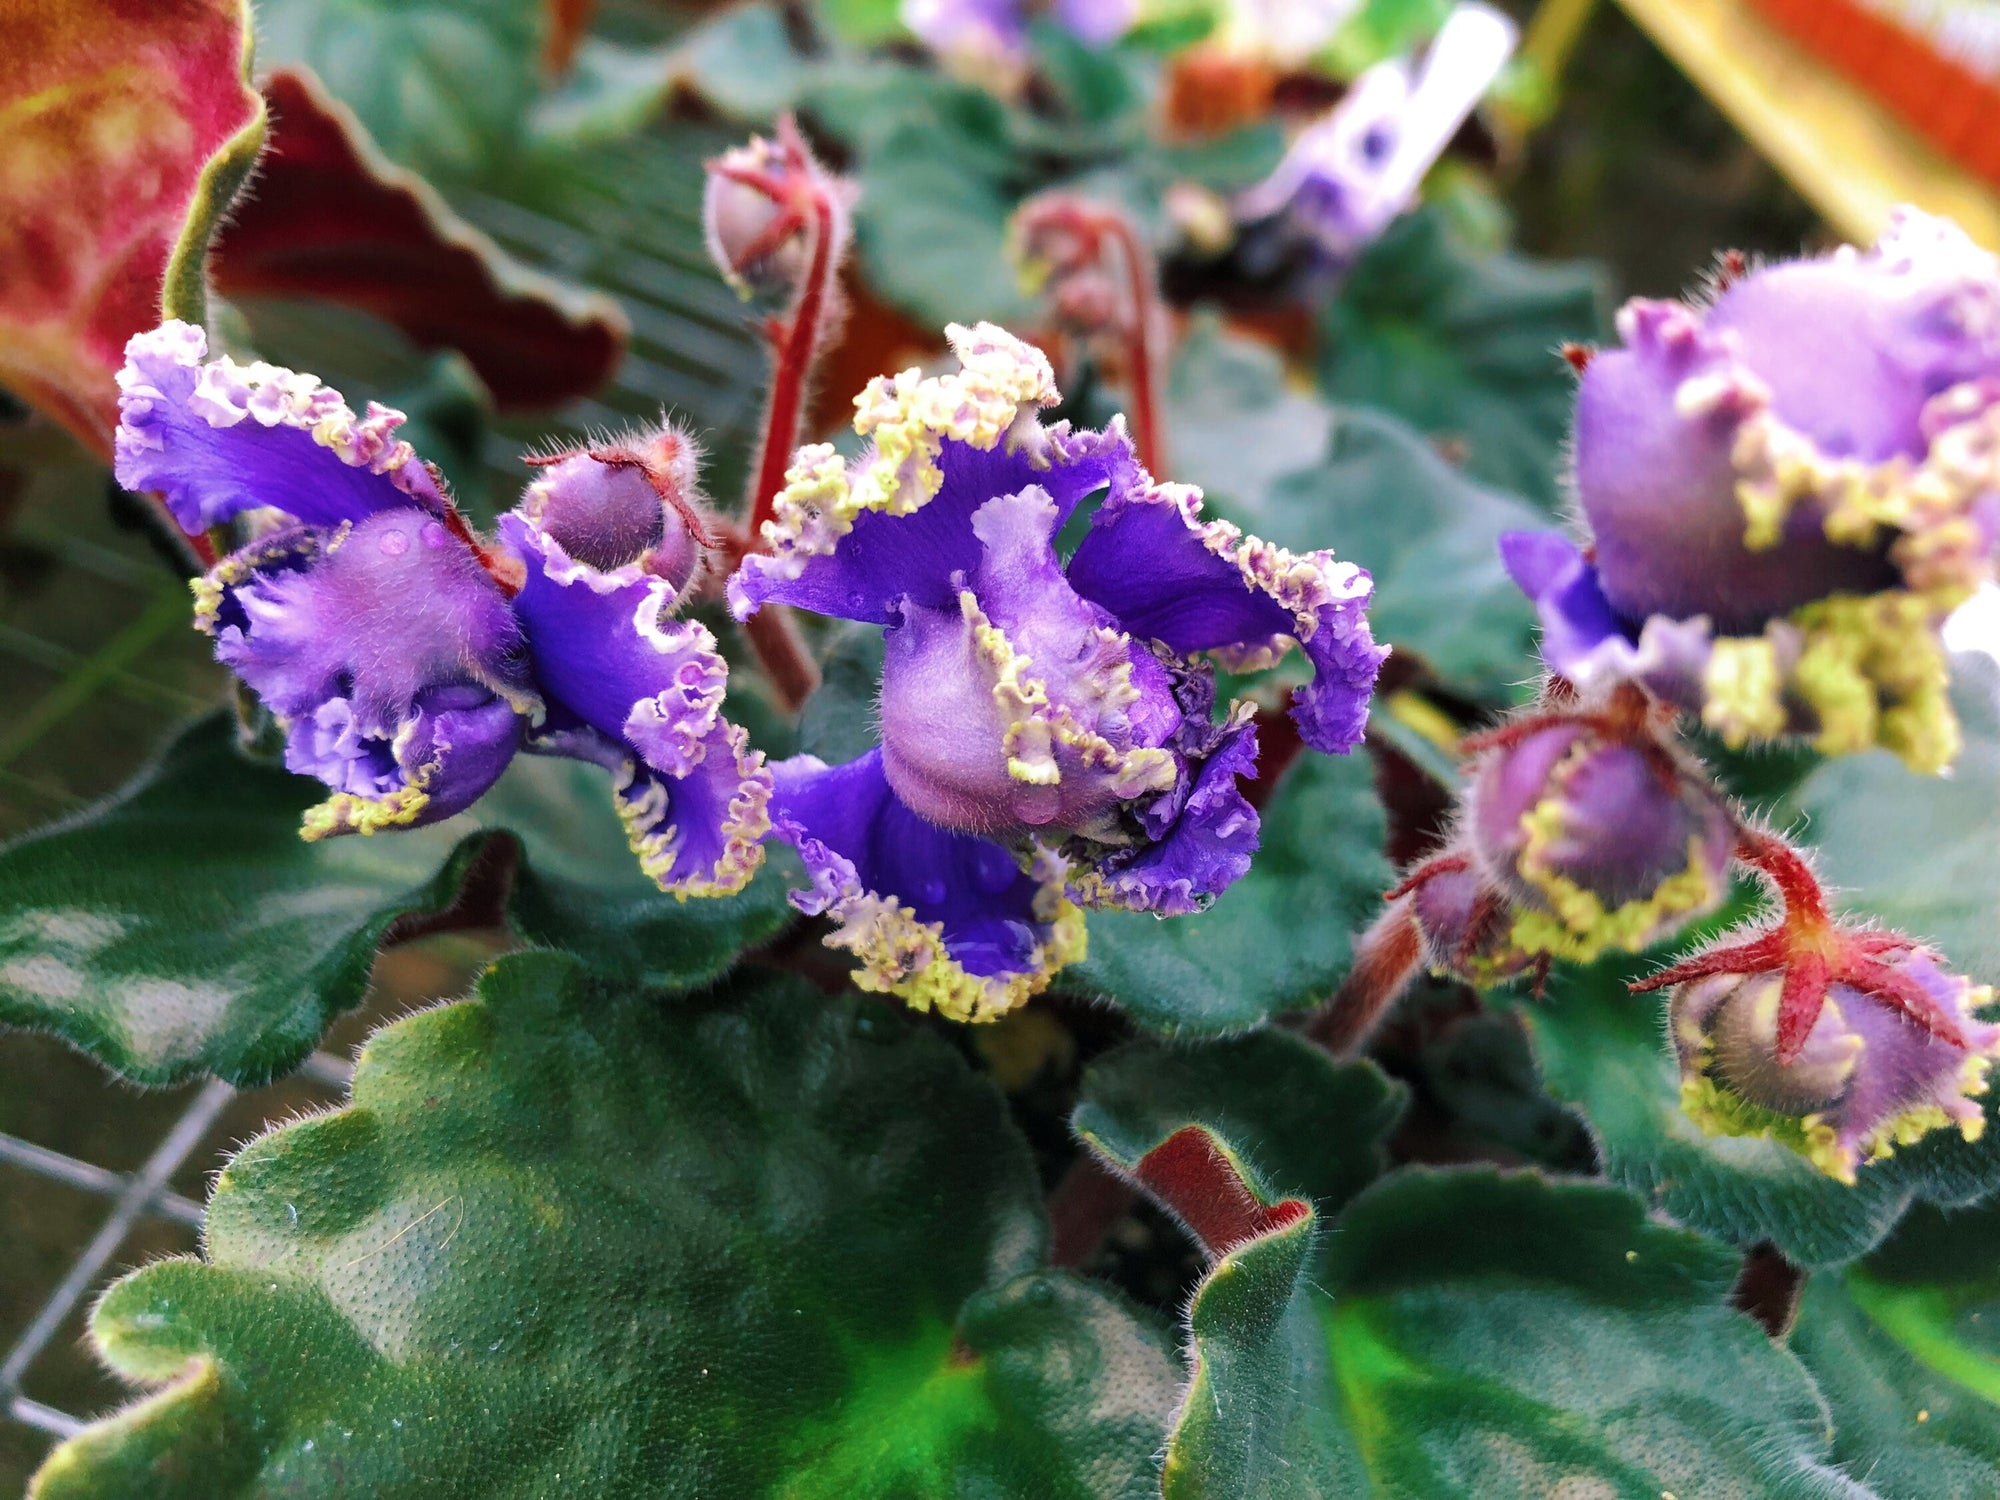 Live house plant African Violet ‘Harmony’s Blue Frills’ garden blue double bloom flower Potted 4” pot gift